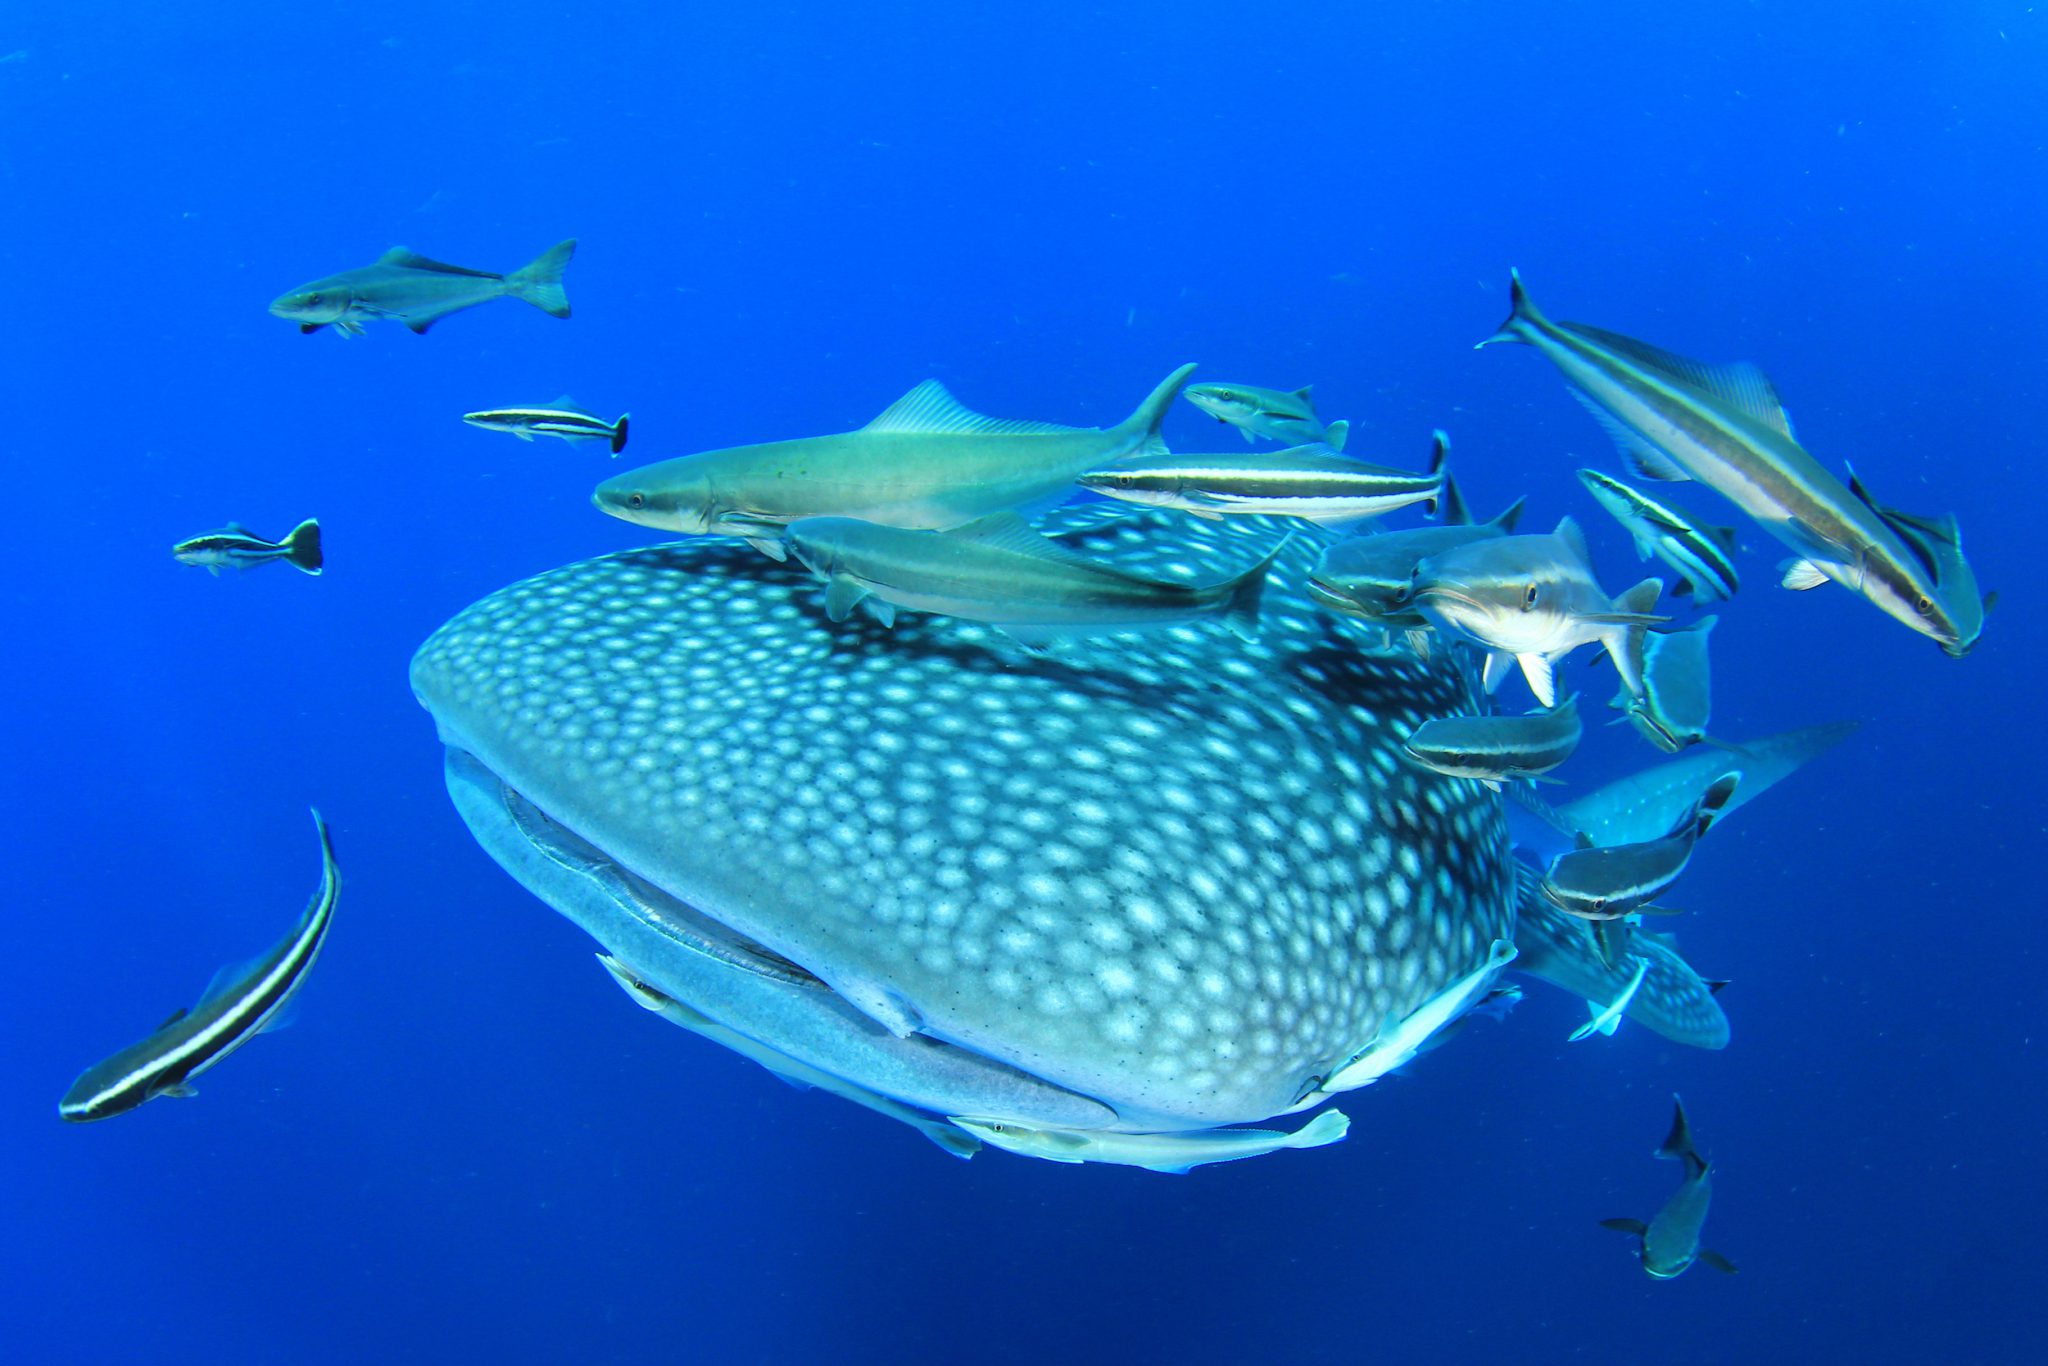 A whale shark approaching the camera during a dive at Ningaloo Reef, Western Australia